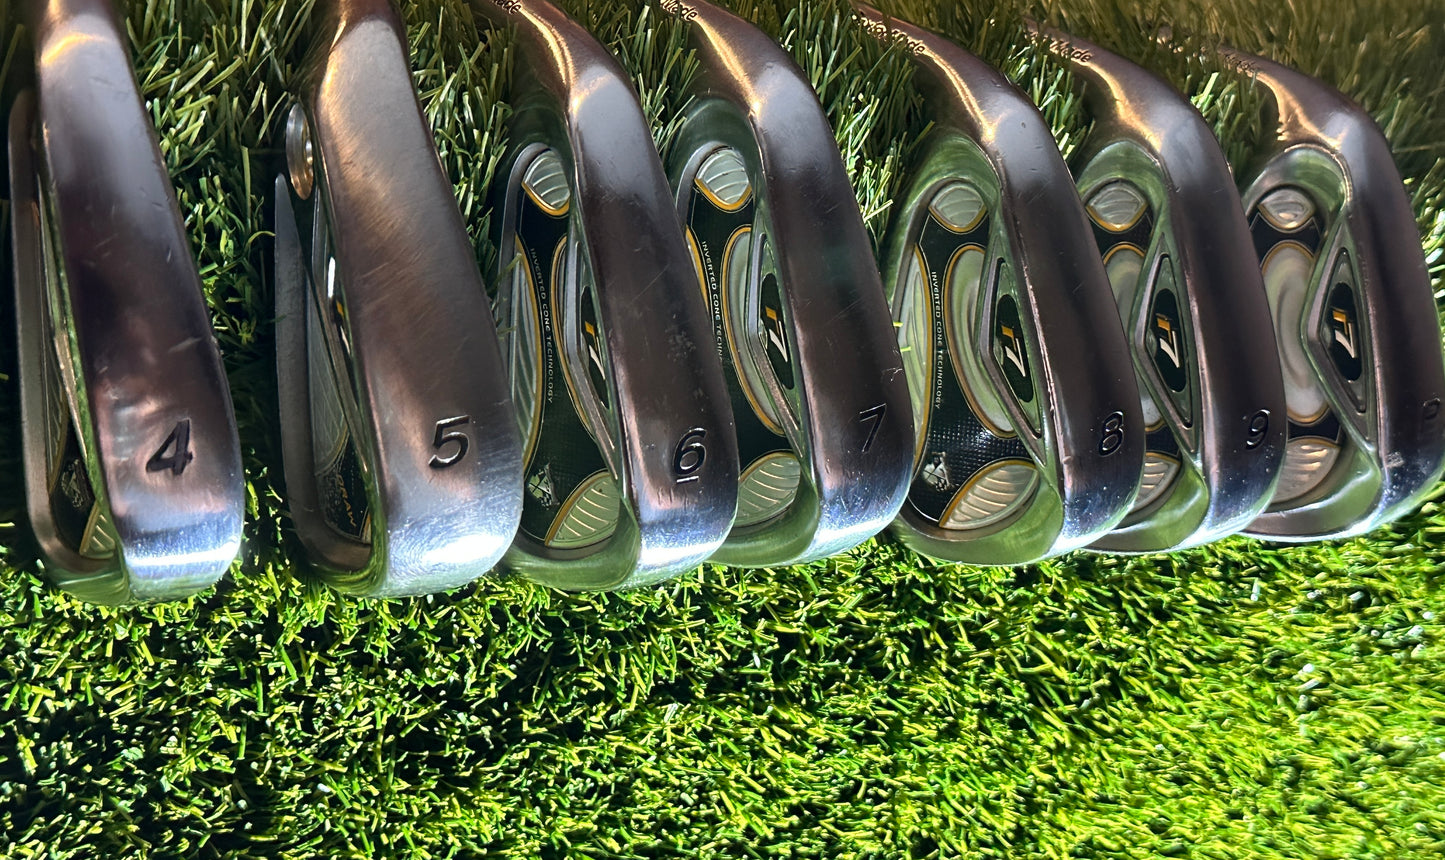 TaylorMade R7 Iron Set 4-PW, Stunning Clubs See Description